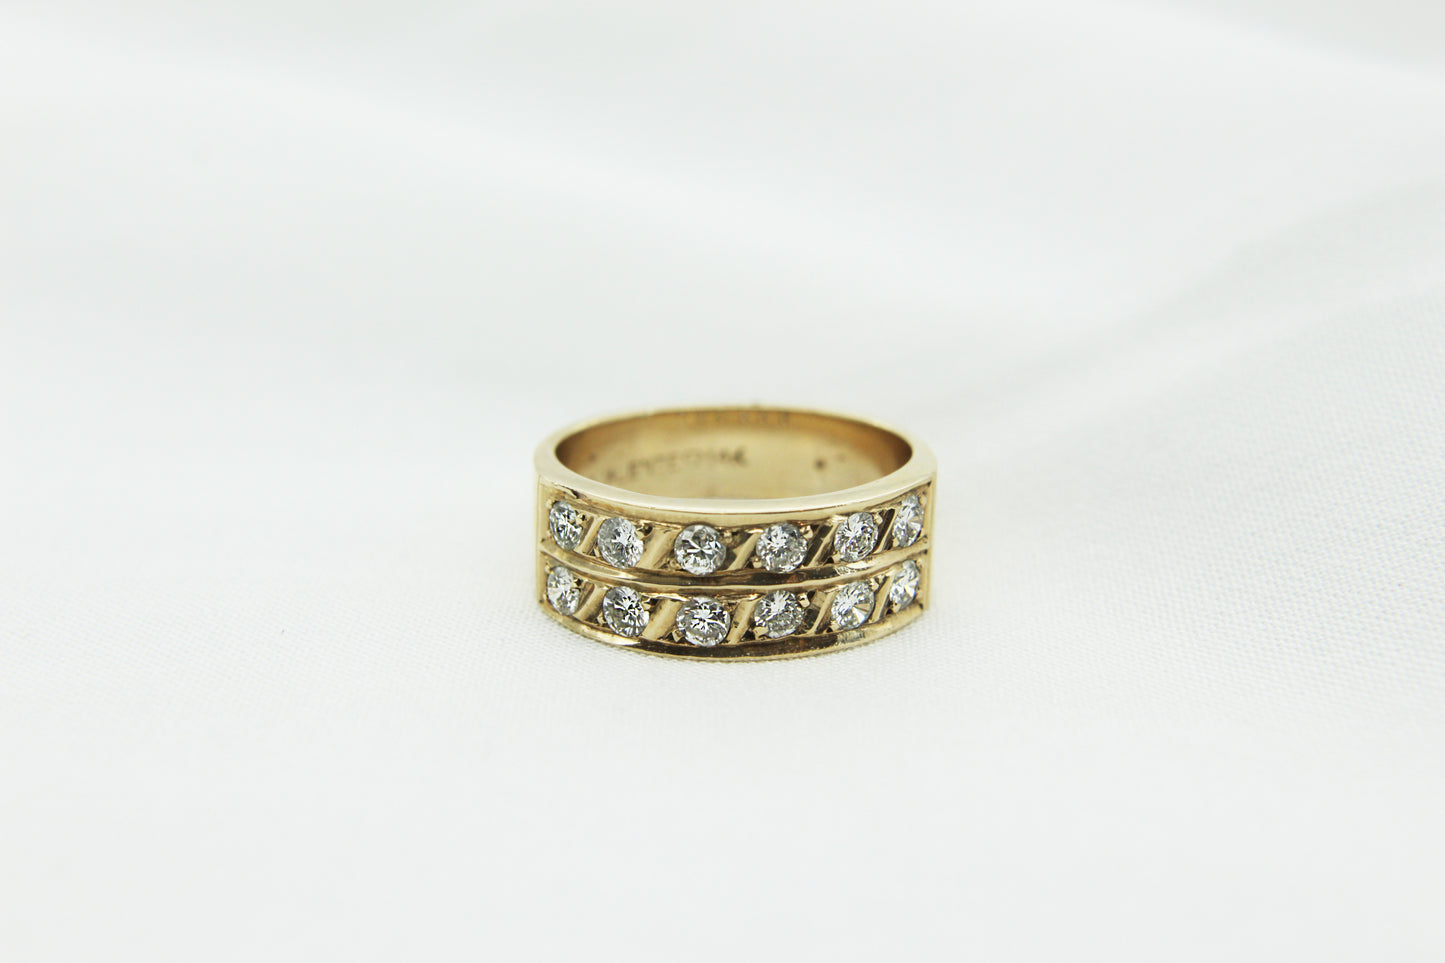 Double Row Wedding Band Ring in 14K